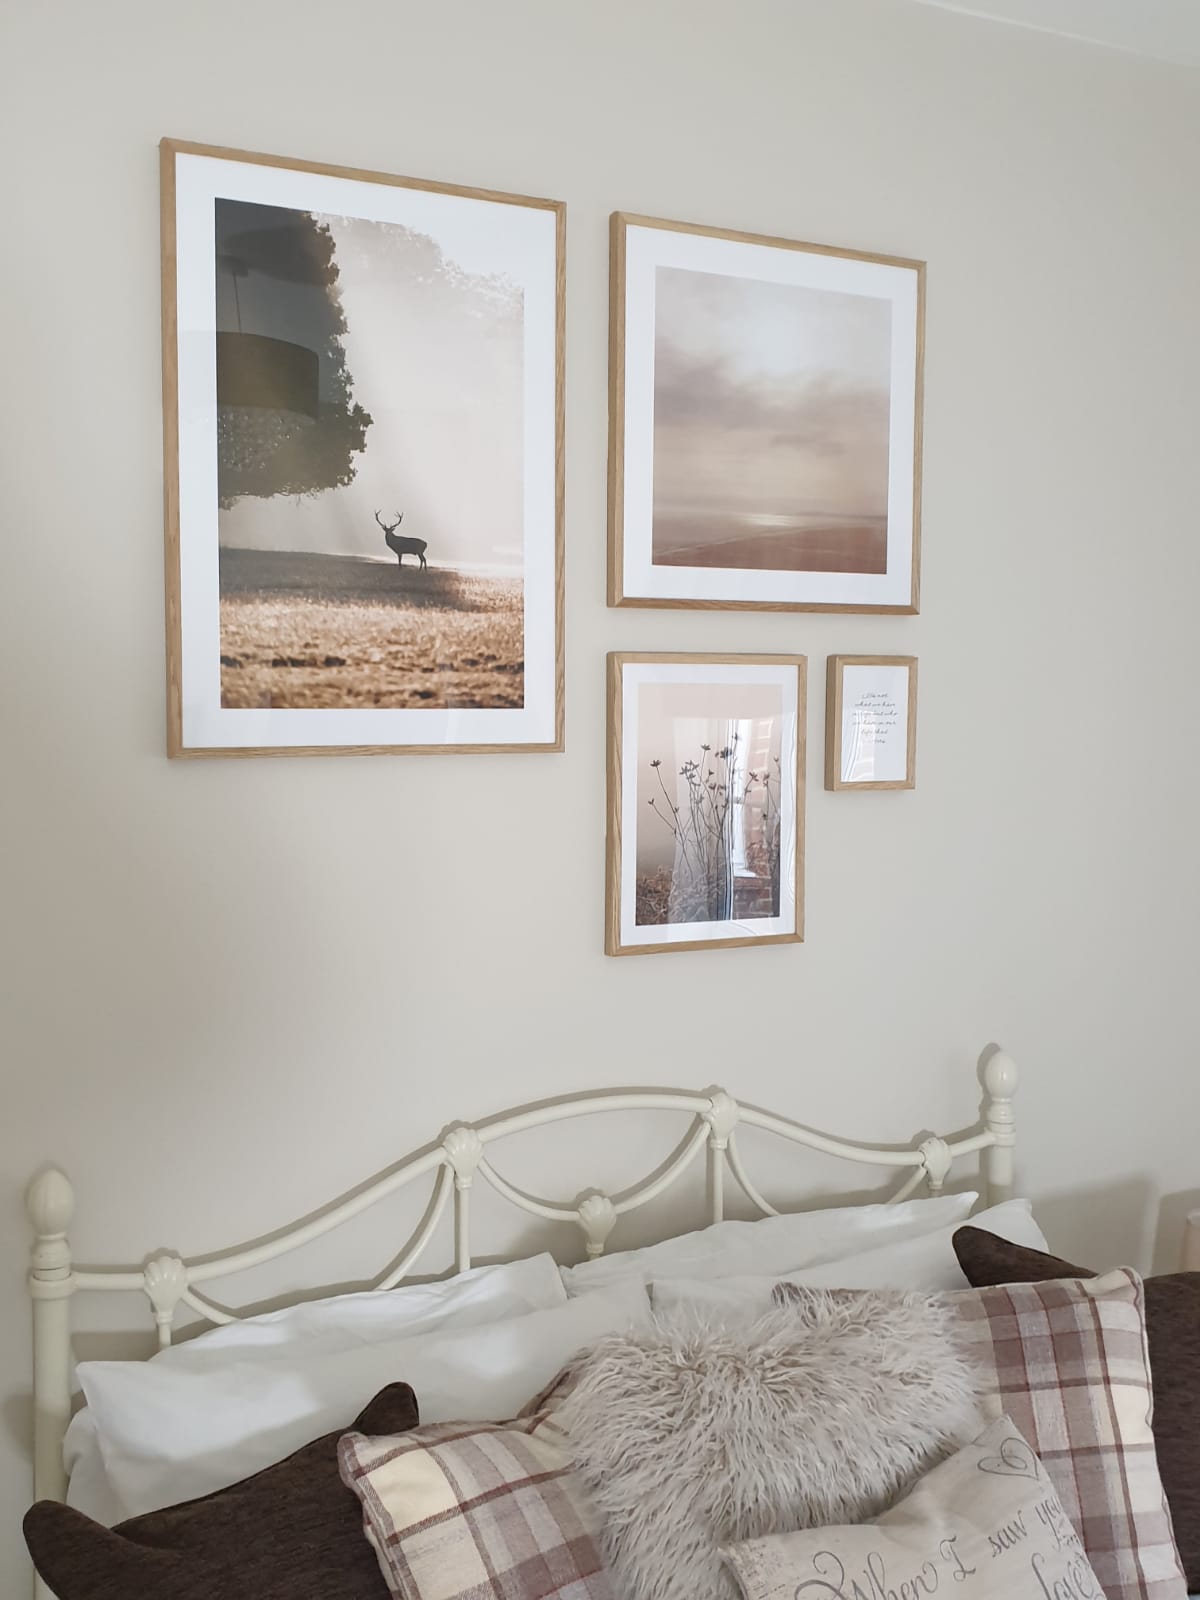 the 4 pictures on the wall above the bed